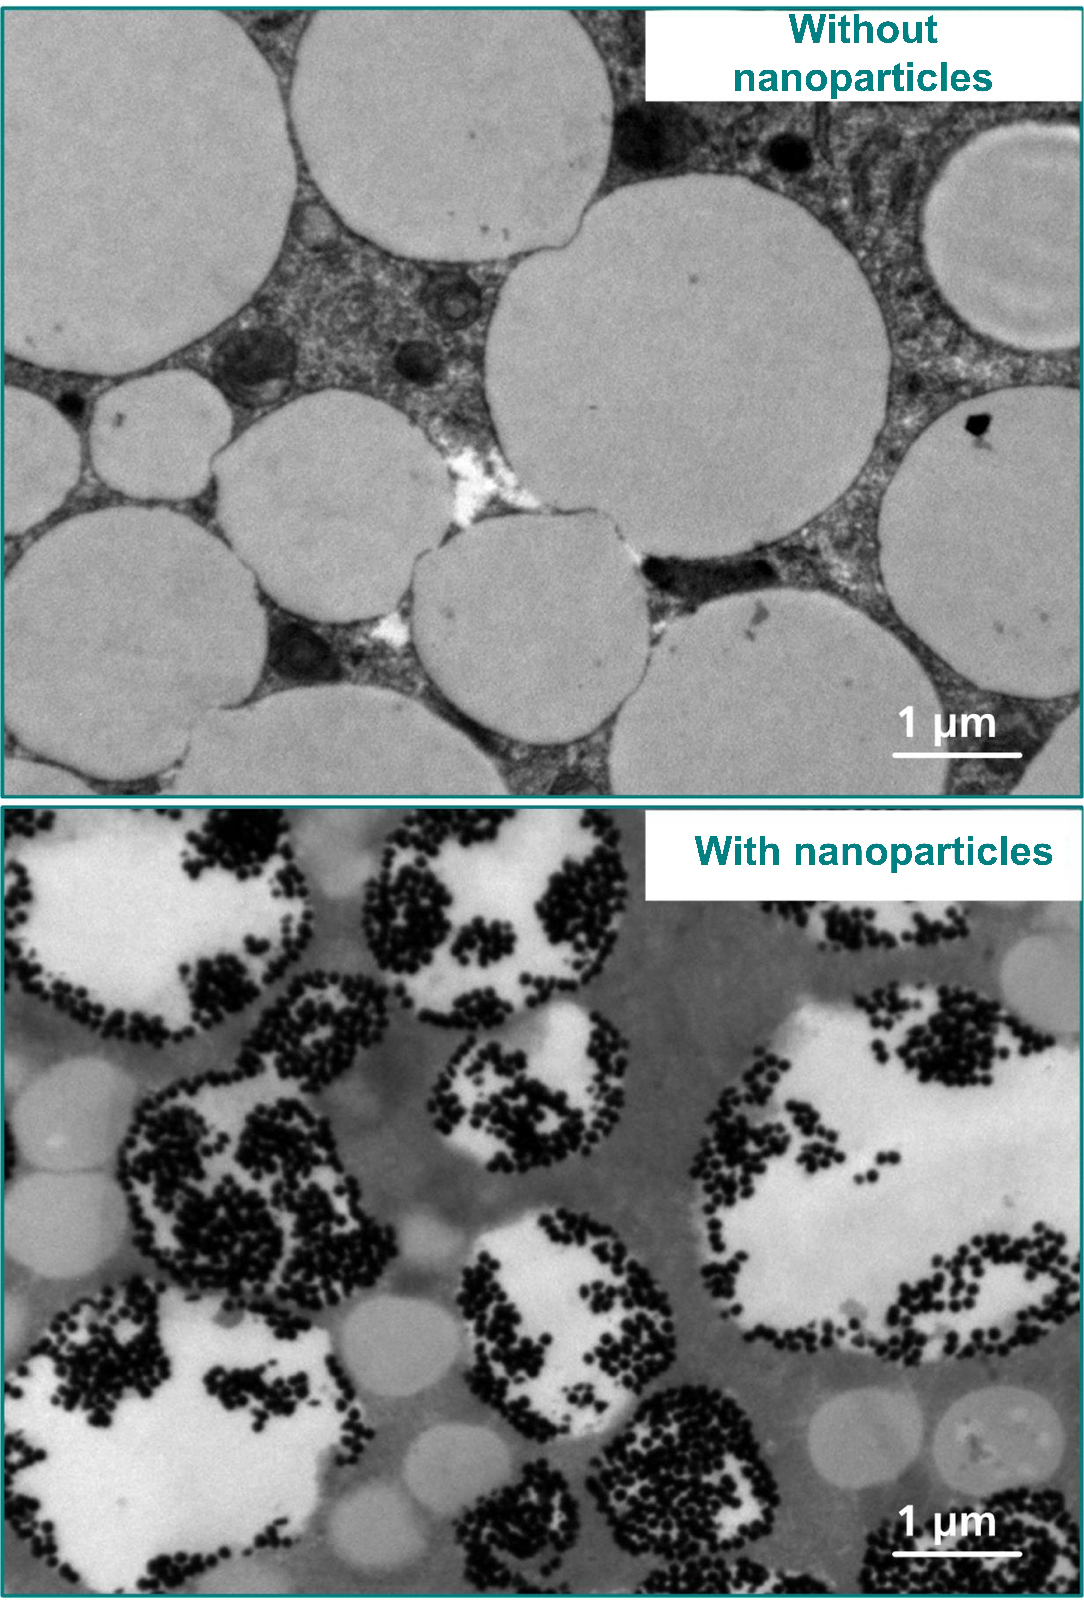 Detail of a microscopic image of a human lipid cell: untreated at the top, treated with gold nanoparticles at the bottom. The particles accumulate in the lipid droplets of the cell.